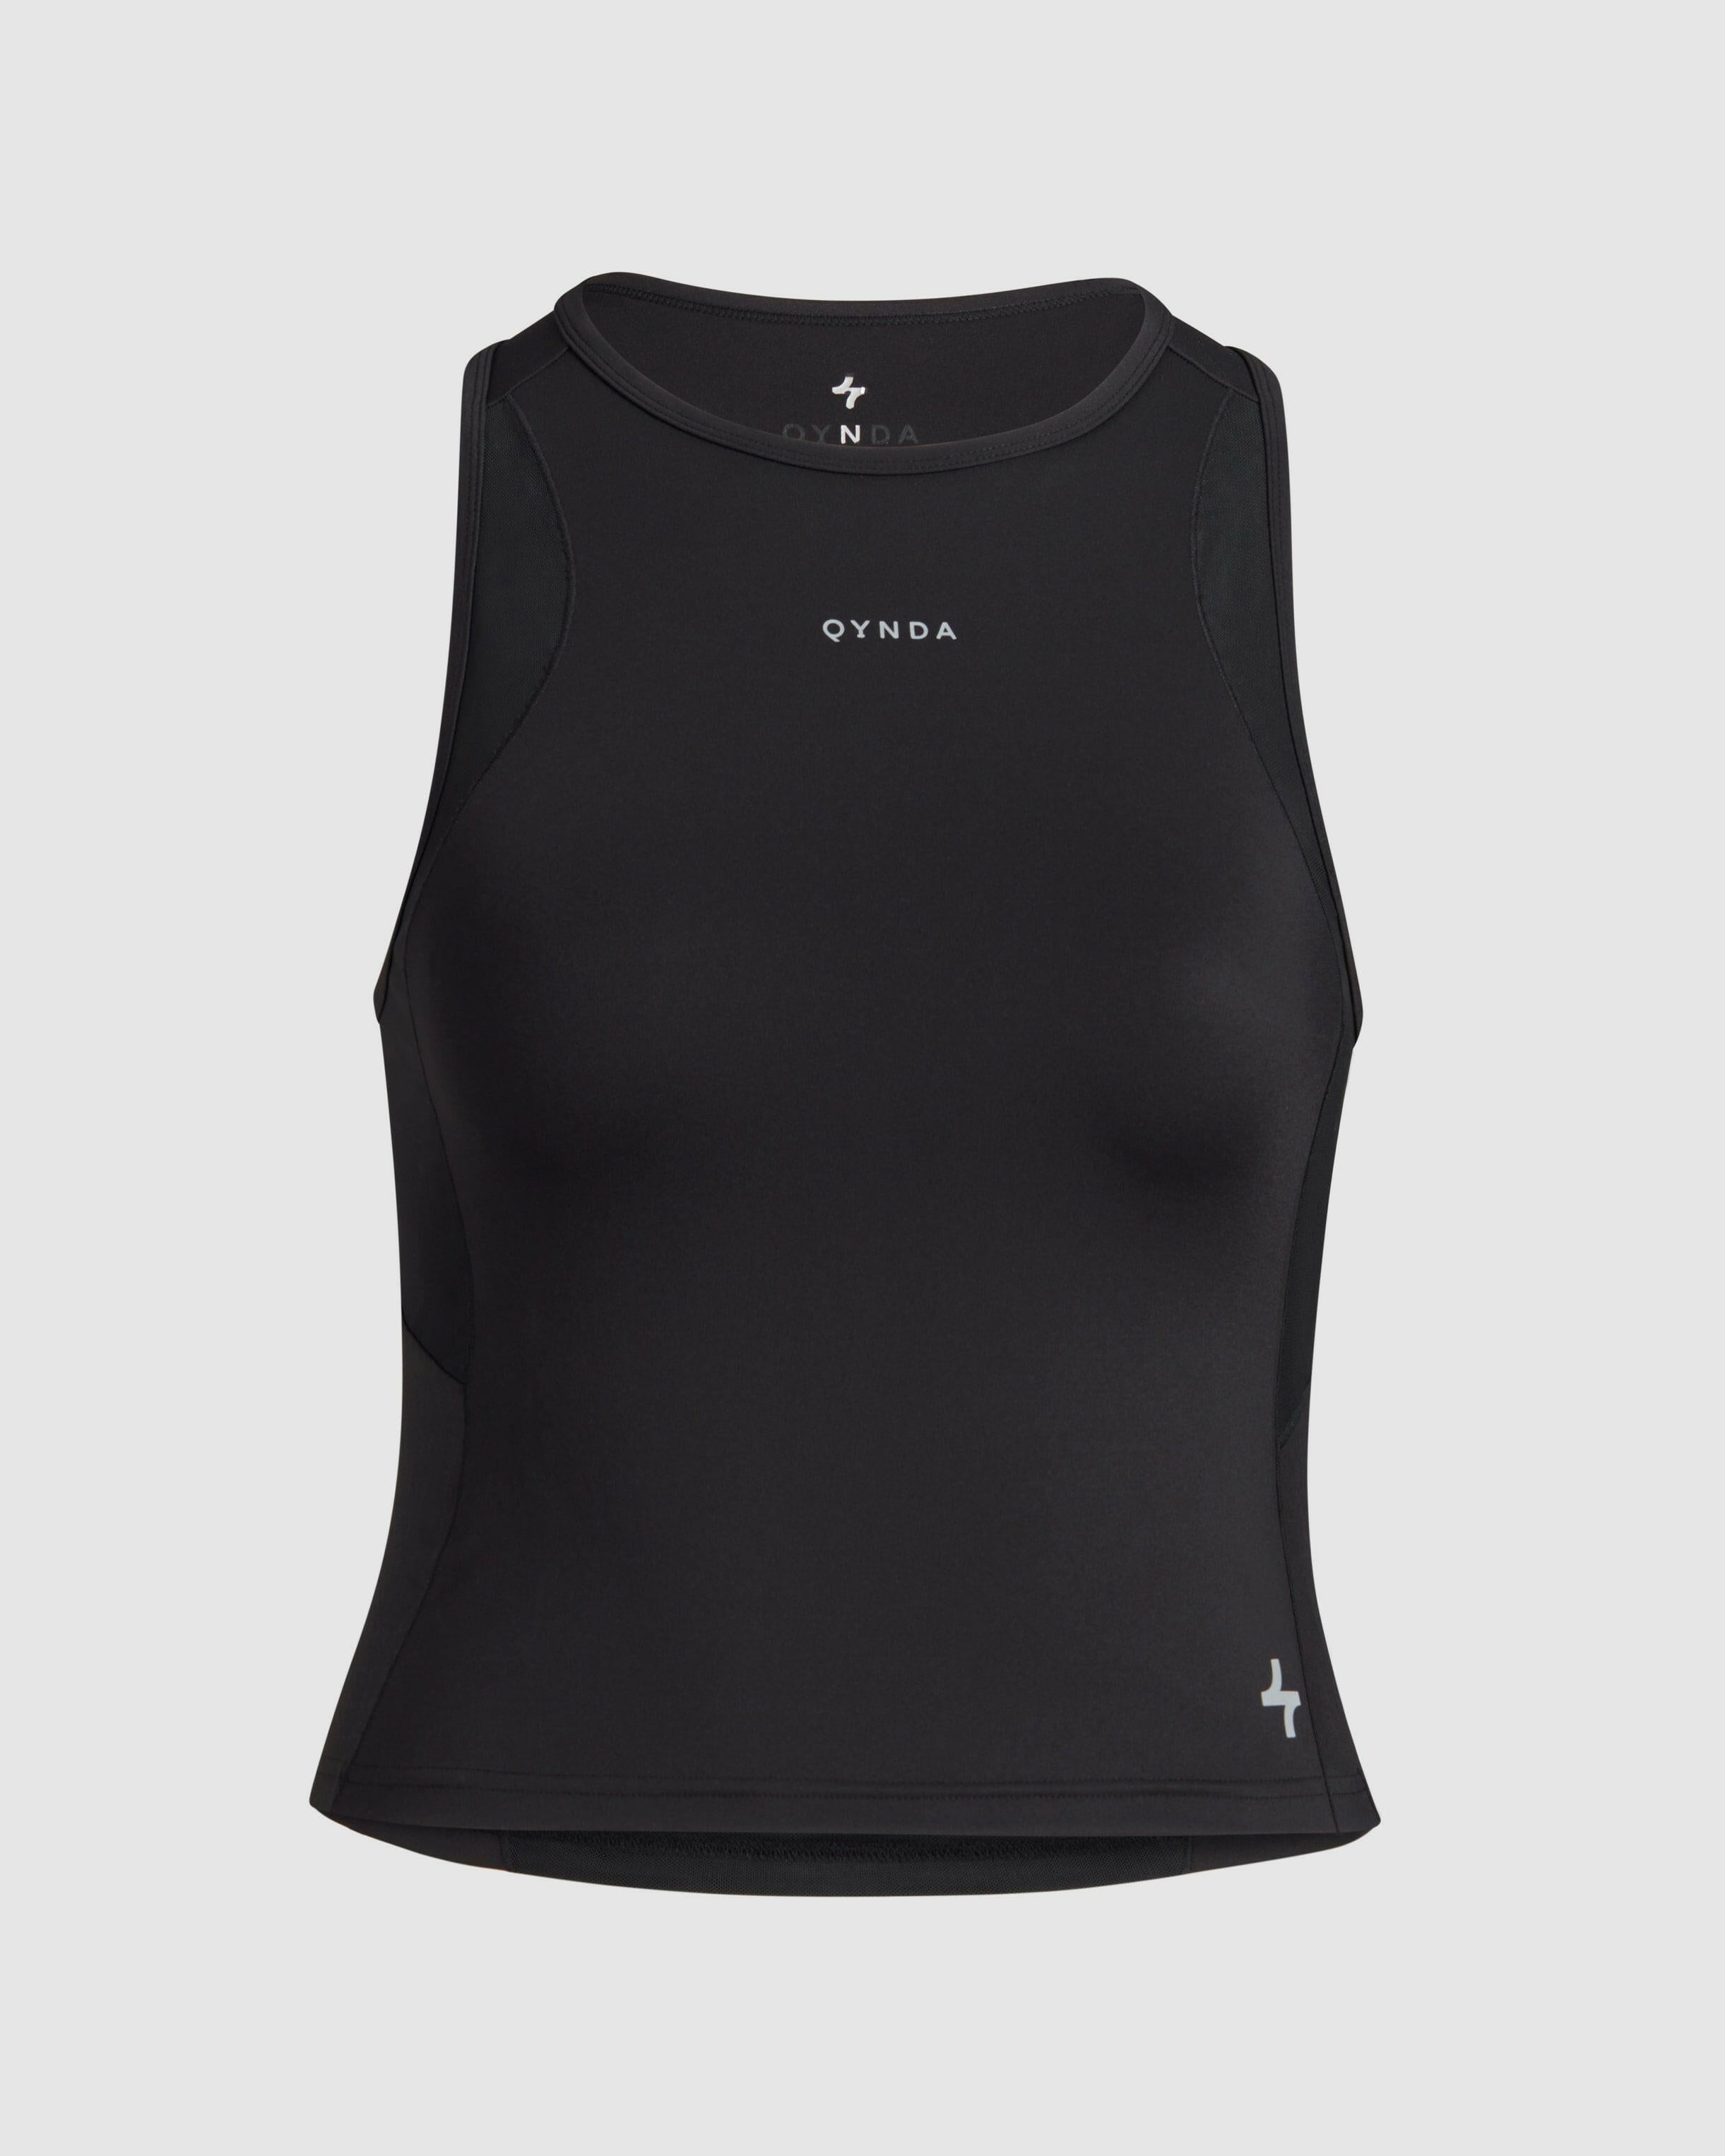 A black sleeveless BADA TANK TOP with qynda logo isolated on a white background.